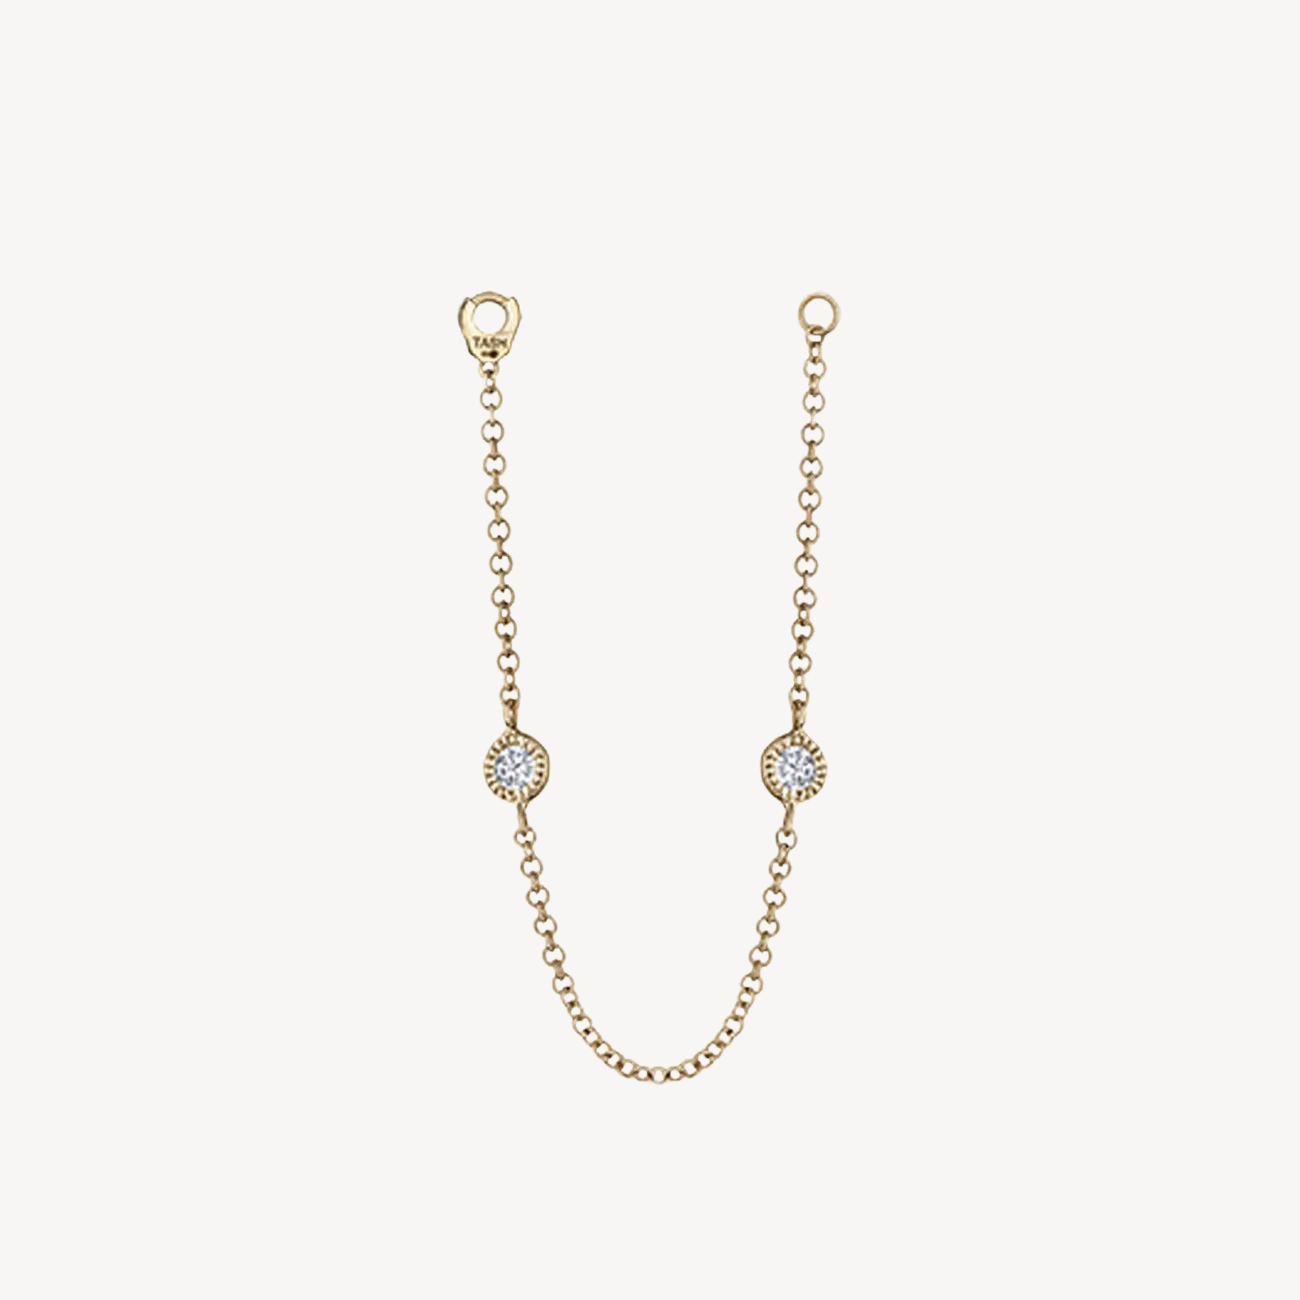 Charm Double Scallop Set Diamond Chain Connecting Or Jaune